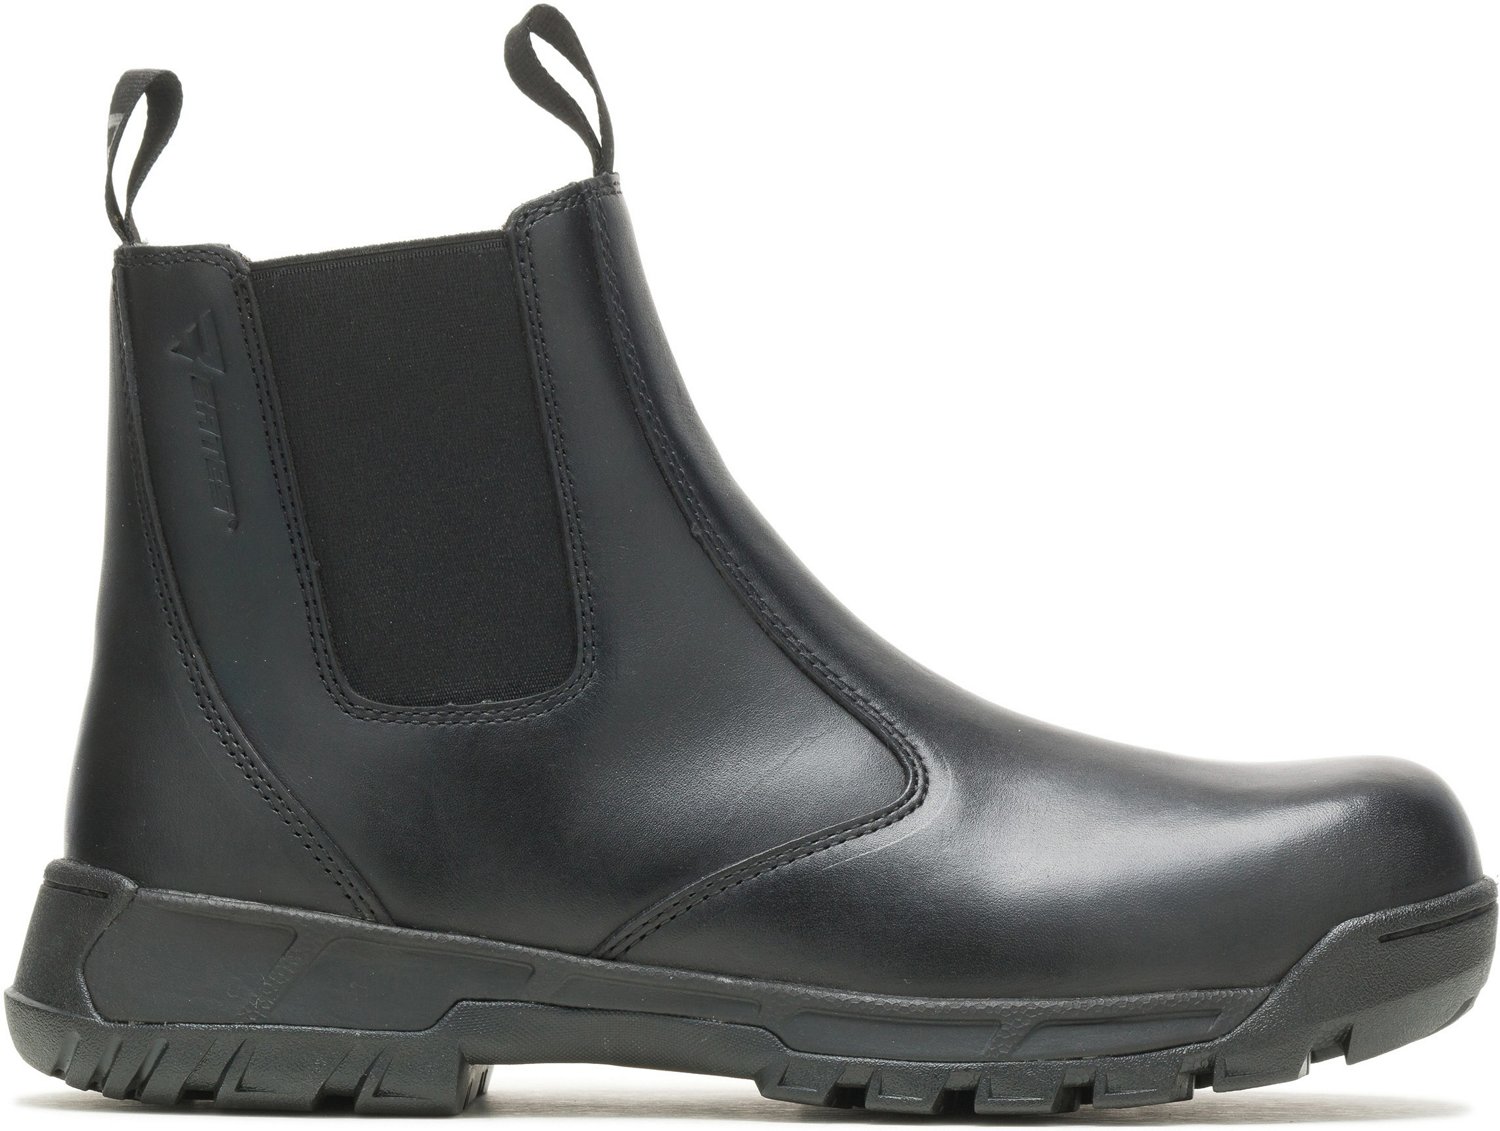 Bates Tactical Sport 2 Station Boots | Free Shipping at Academy